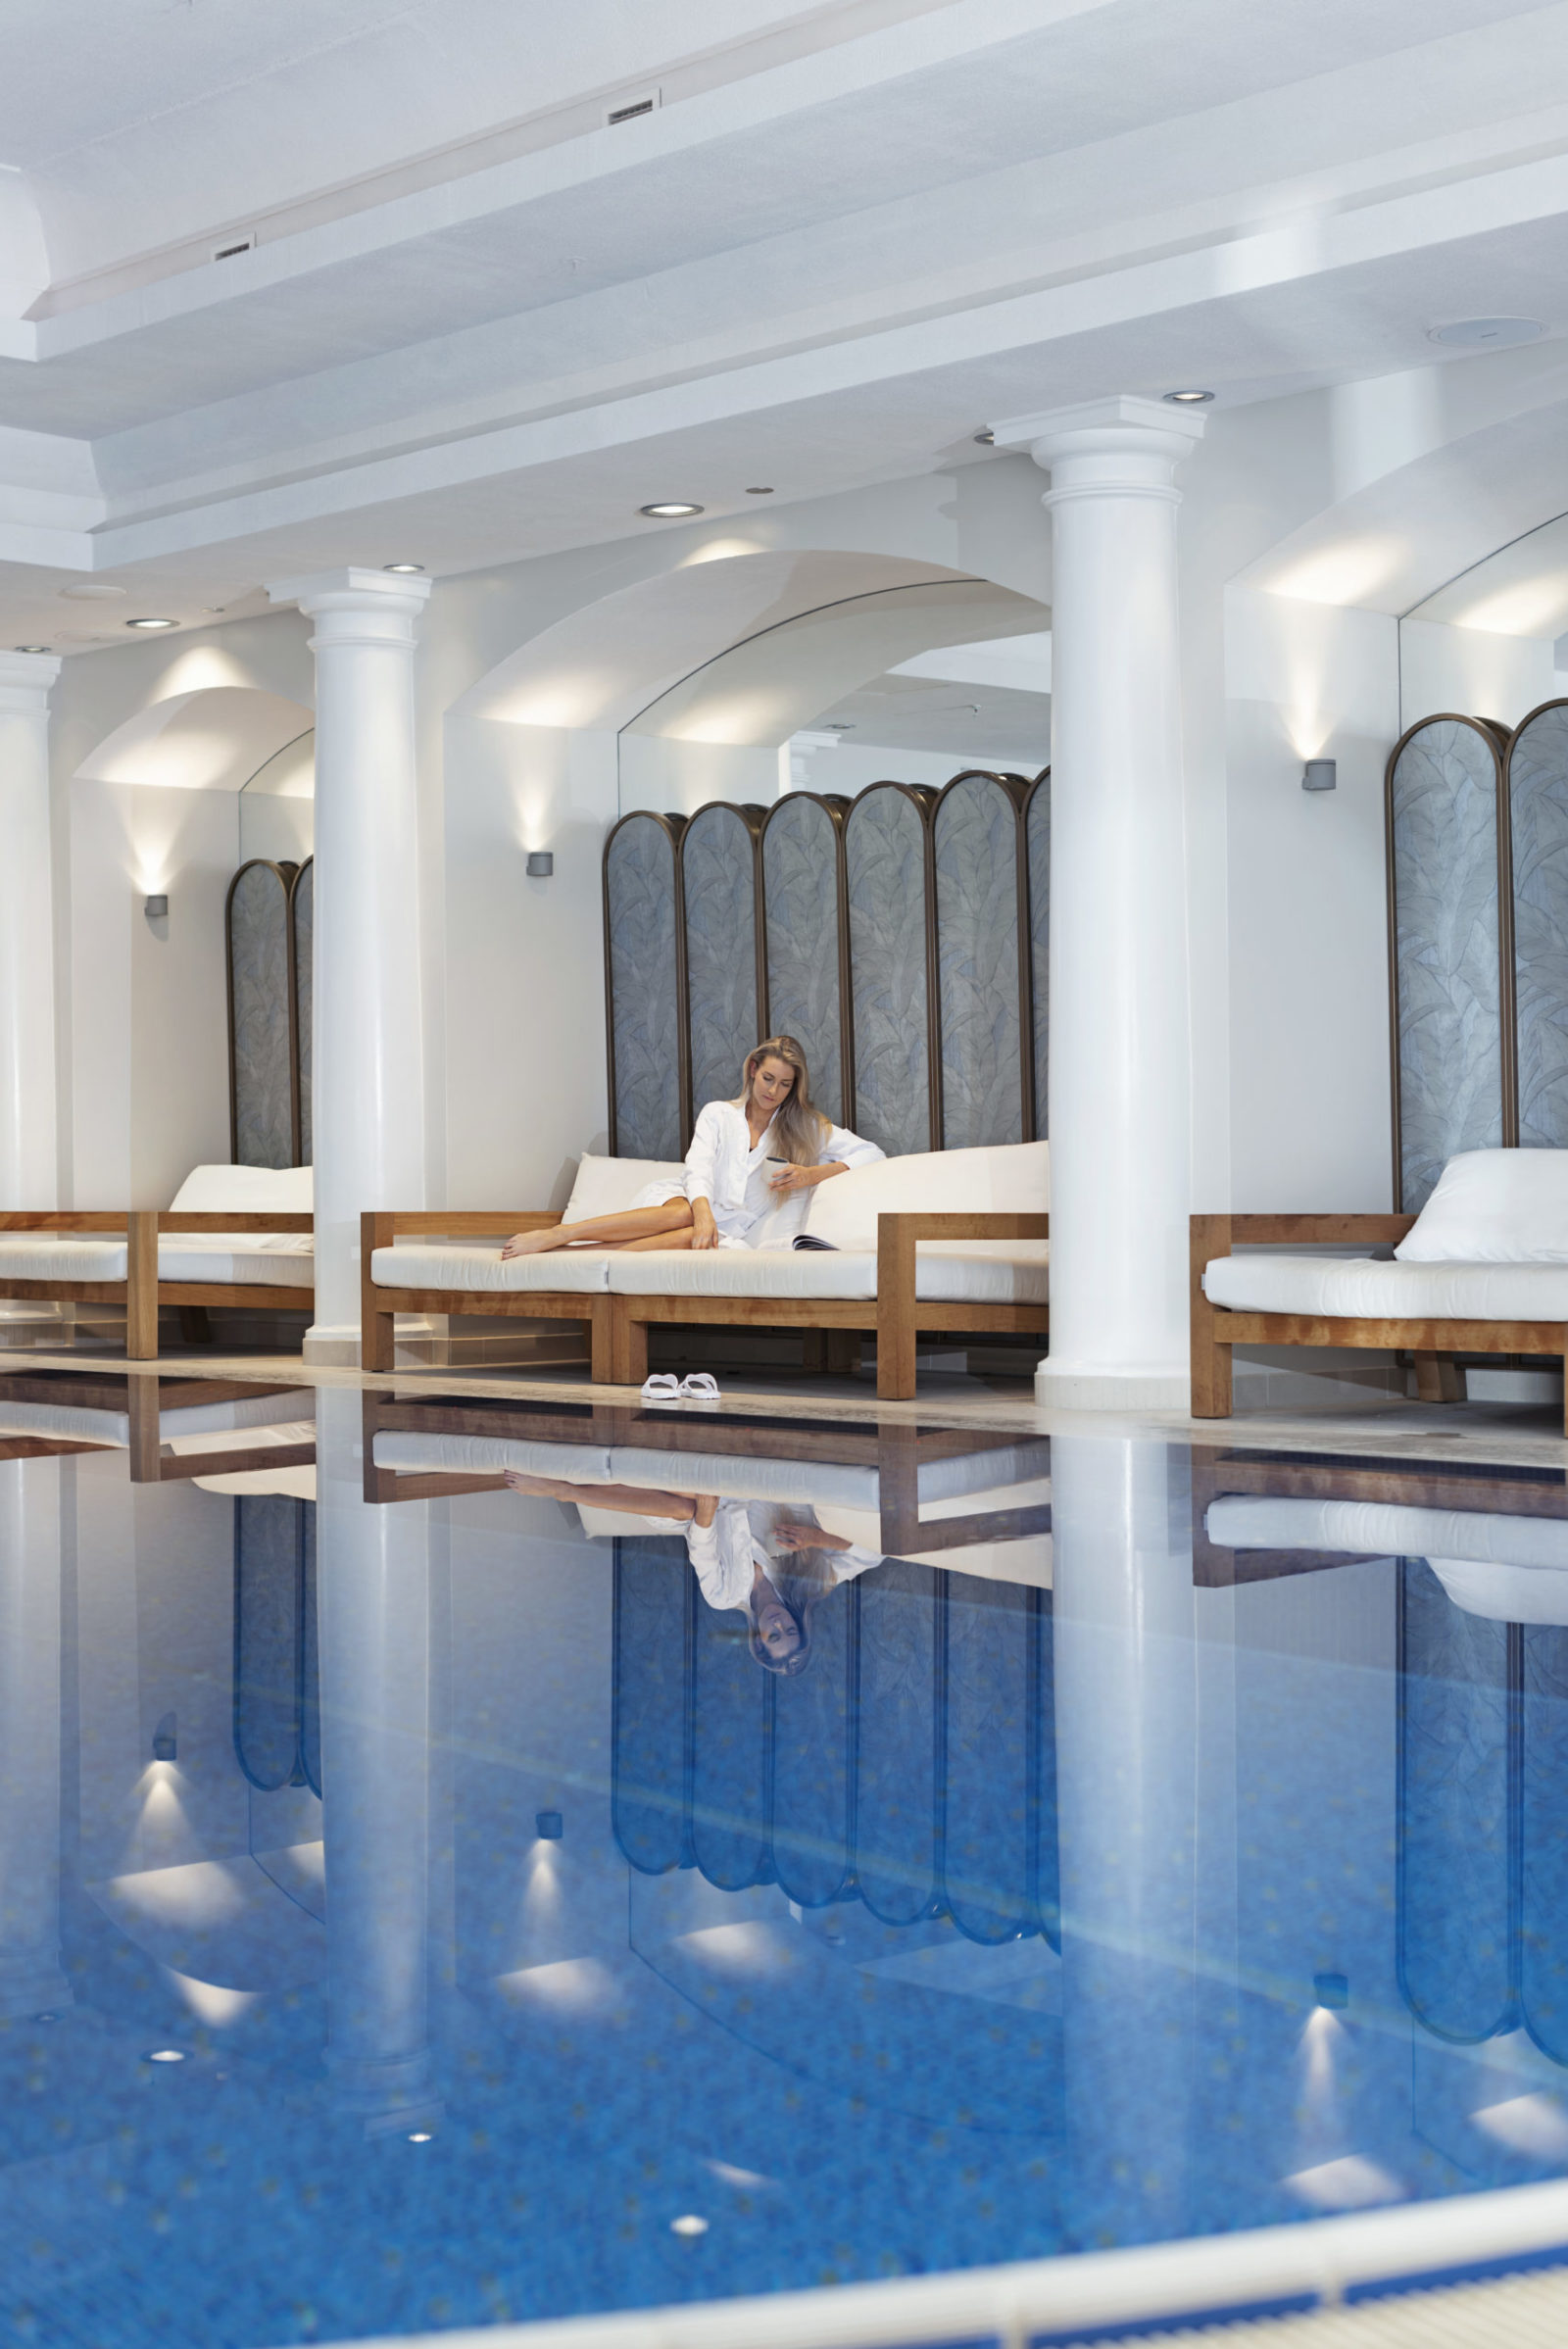 A woman relaxing in the pool area at Britannia spa in Trondheim